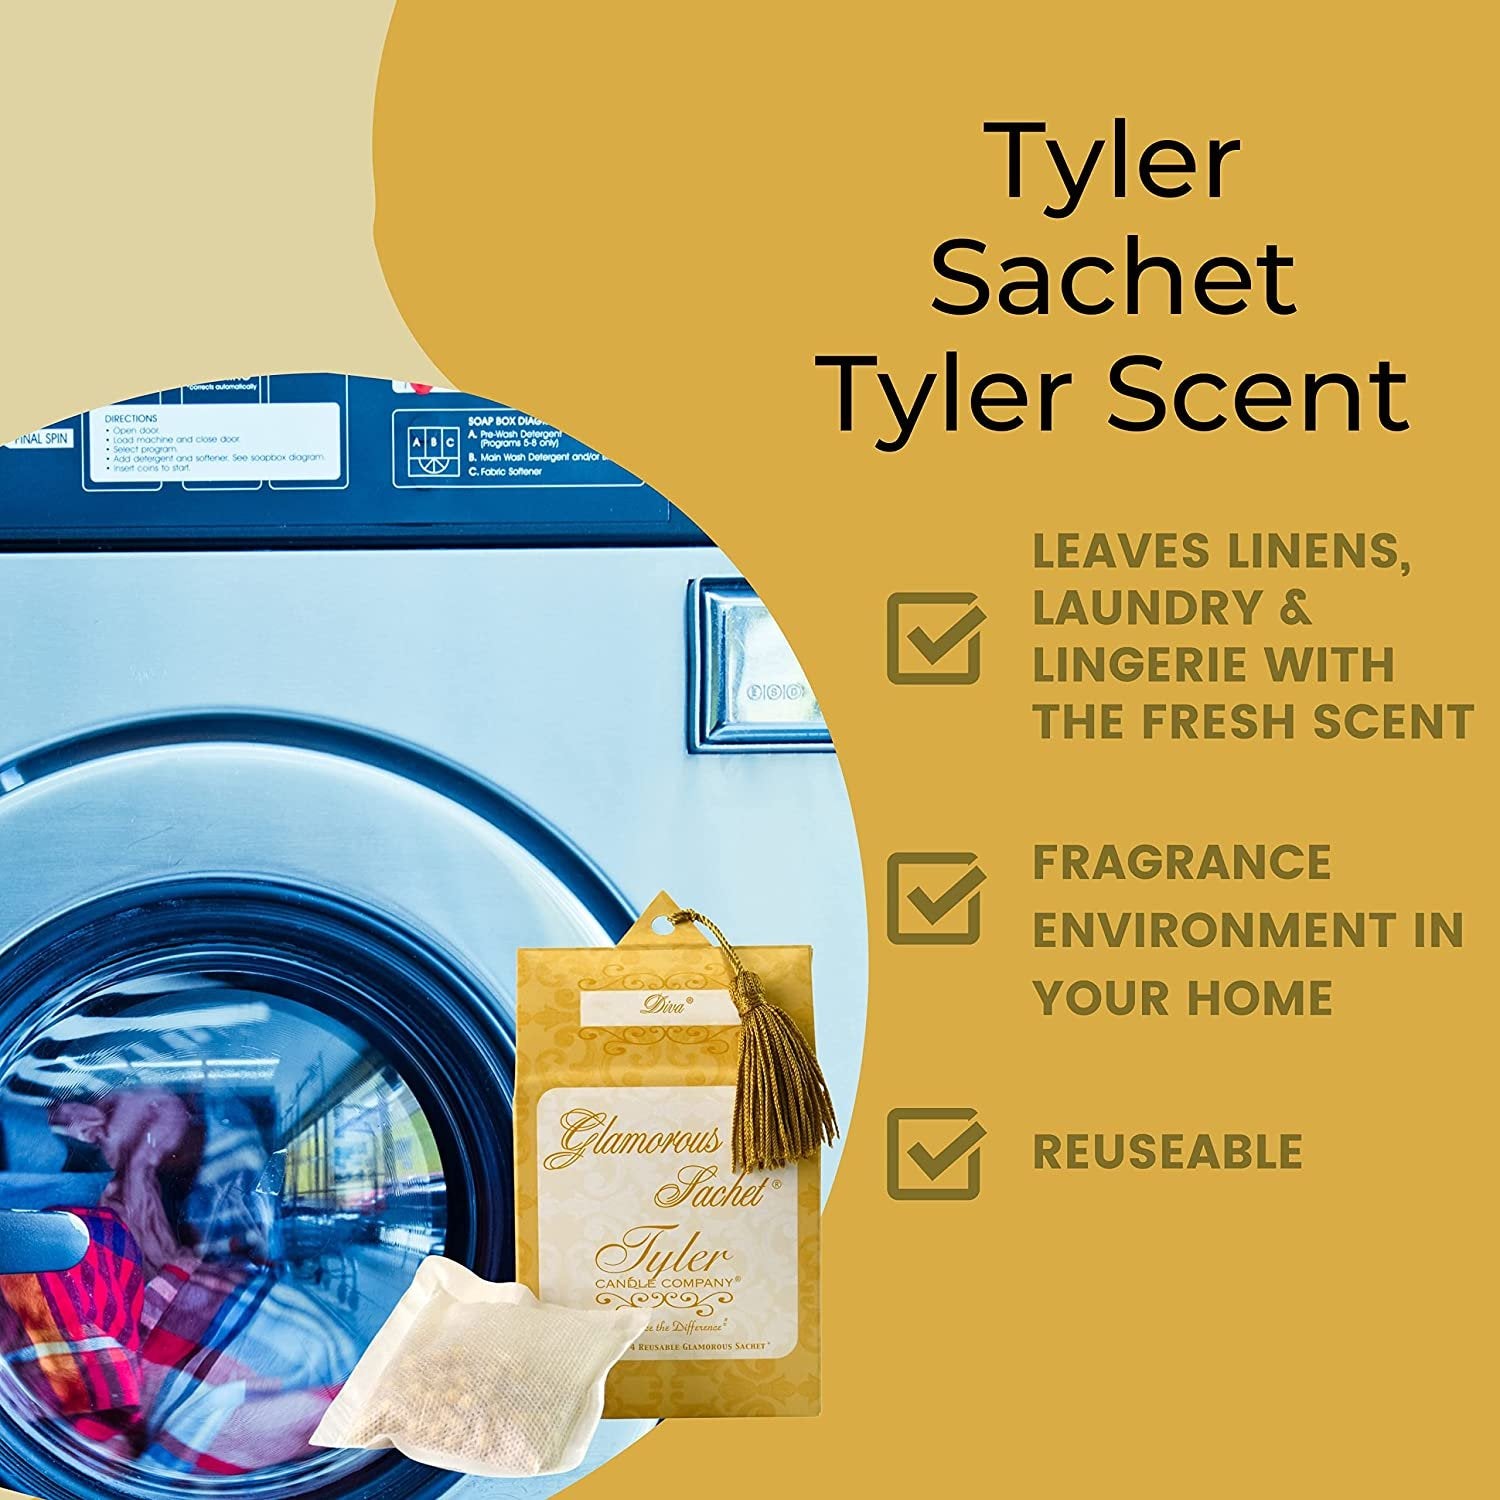 Tyler Candle Company Diva Dryer Sheet Sachets - Glamorous Reusable Dryer Sheets - Sachets for Drawers and Closets - 1 Pack, 4 Sachets, Dryer, Home, or Personal Sachet, with Bonus Key Chain